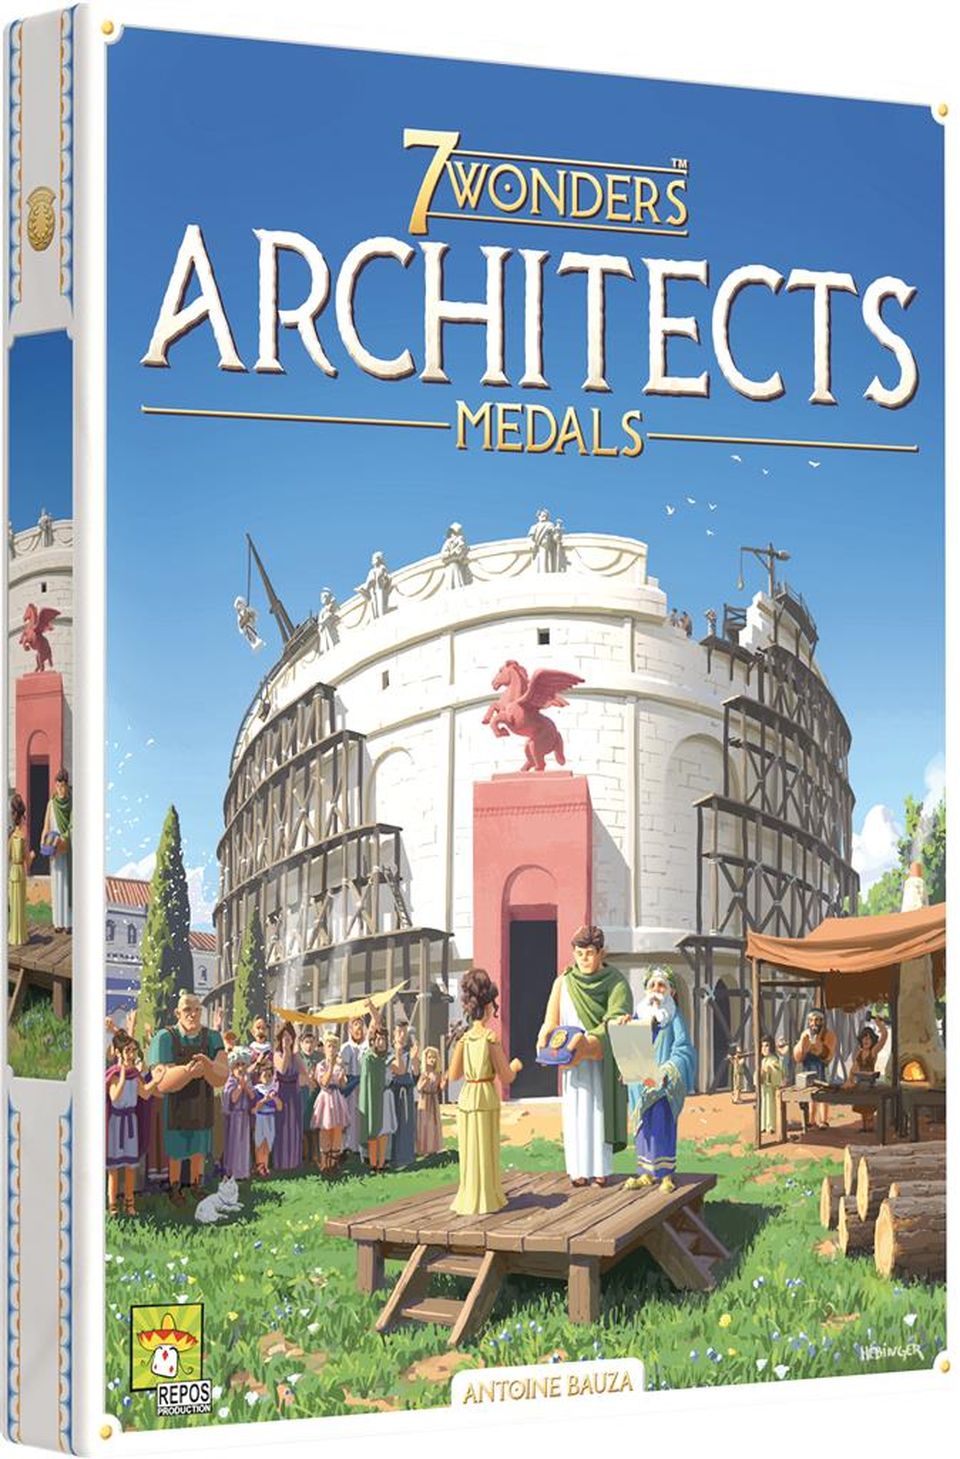 7 Wonders : Architects - Medals (Ext) image